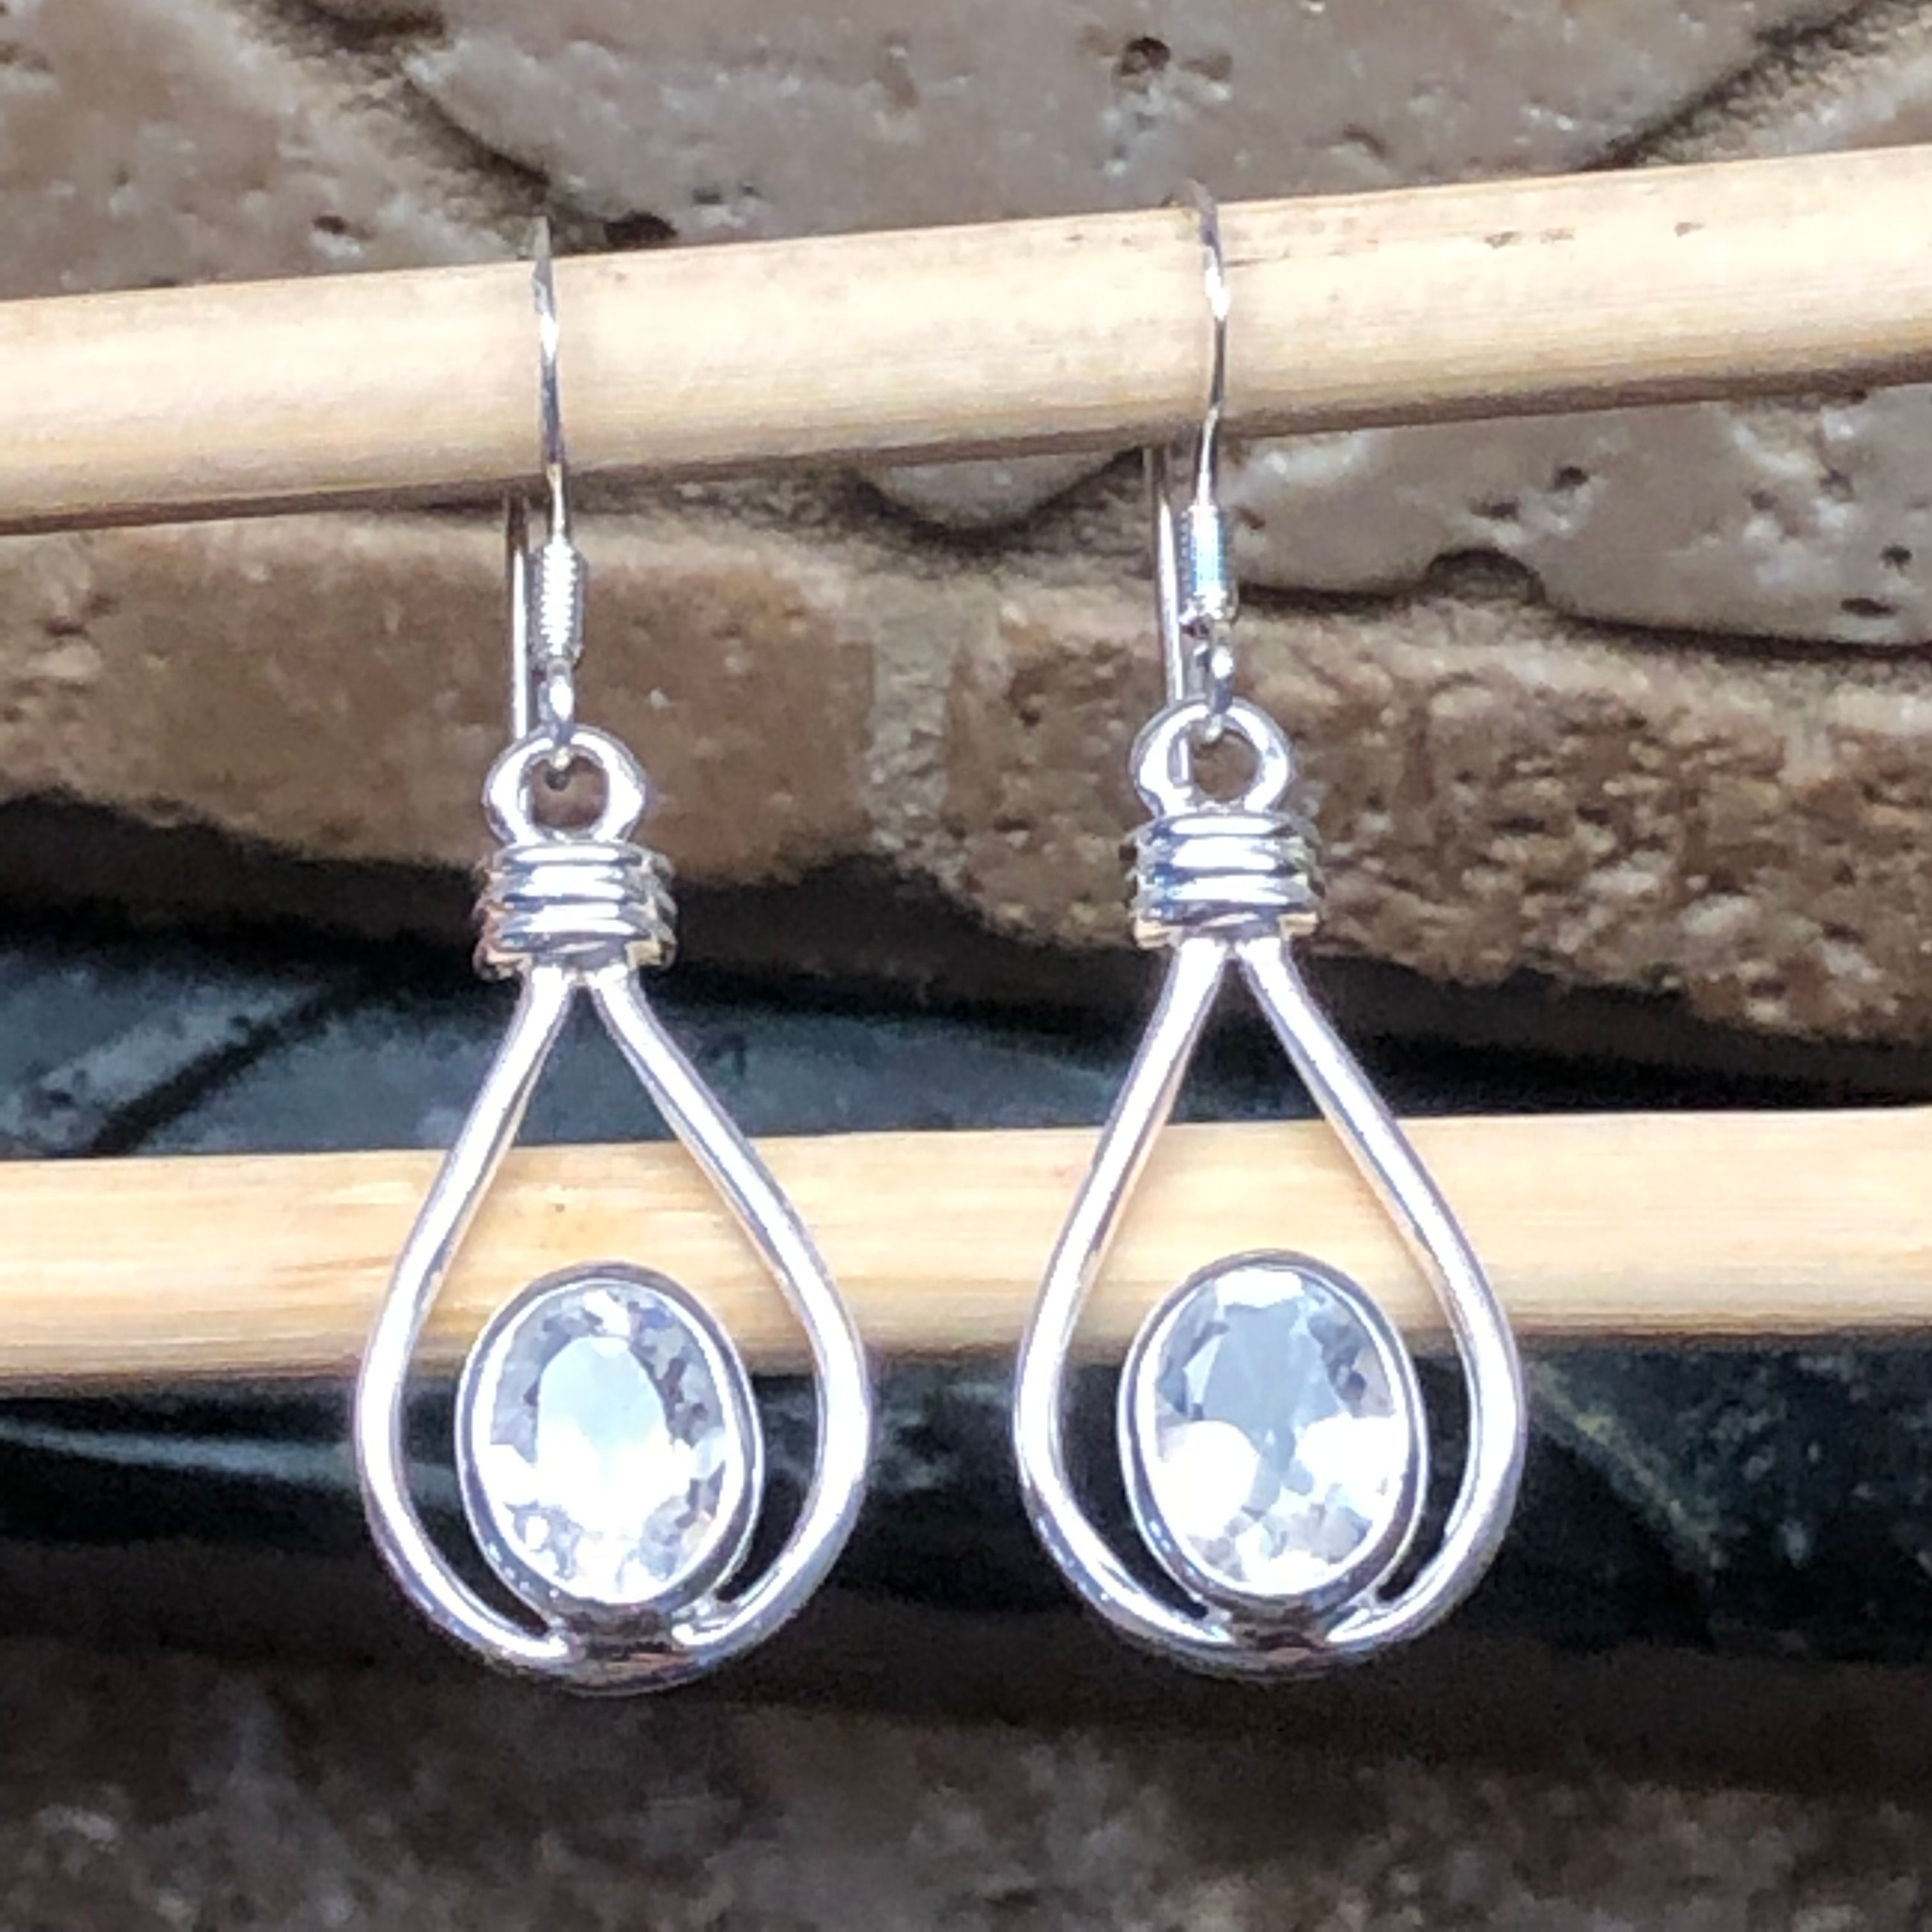 Genuine 2ct White Quartz 925 Solid Sterling Silver Earrings 35mm - Natural Rocks by Kala